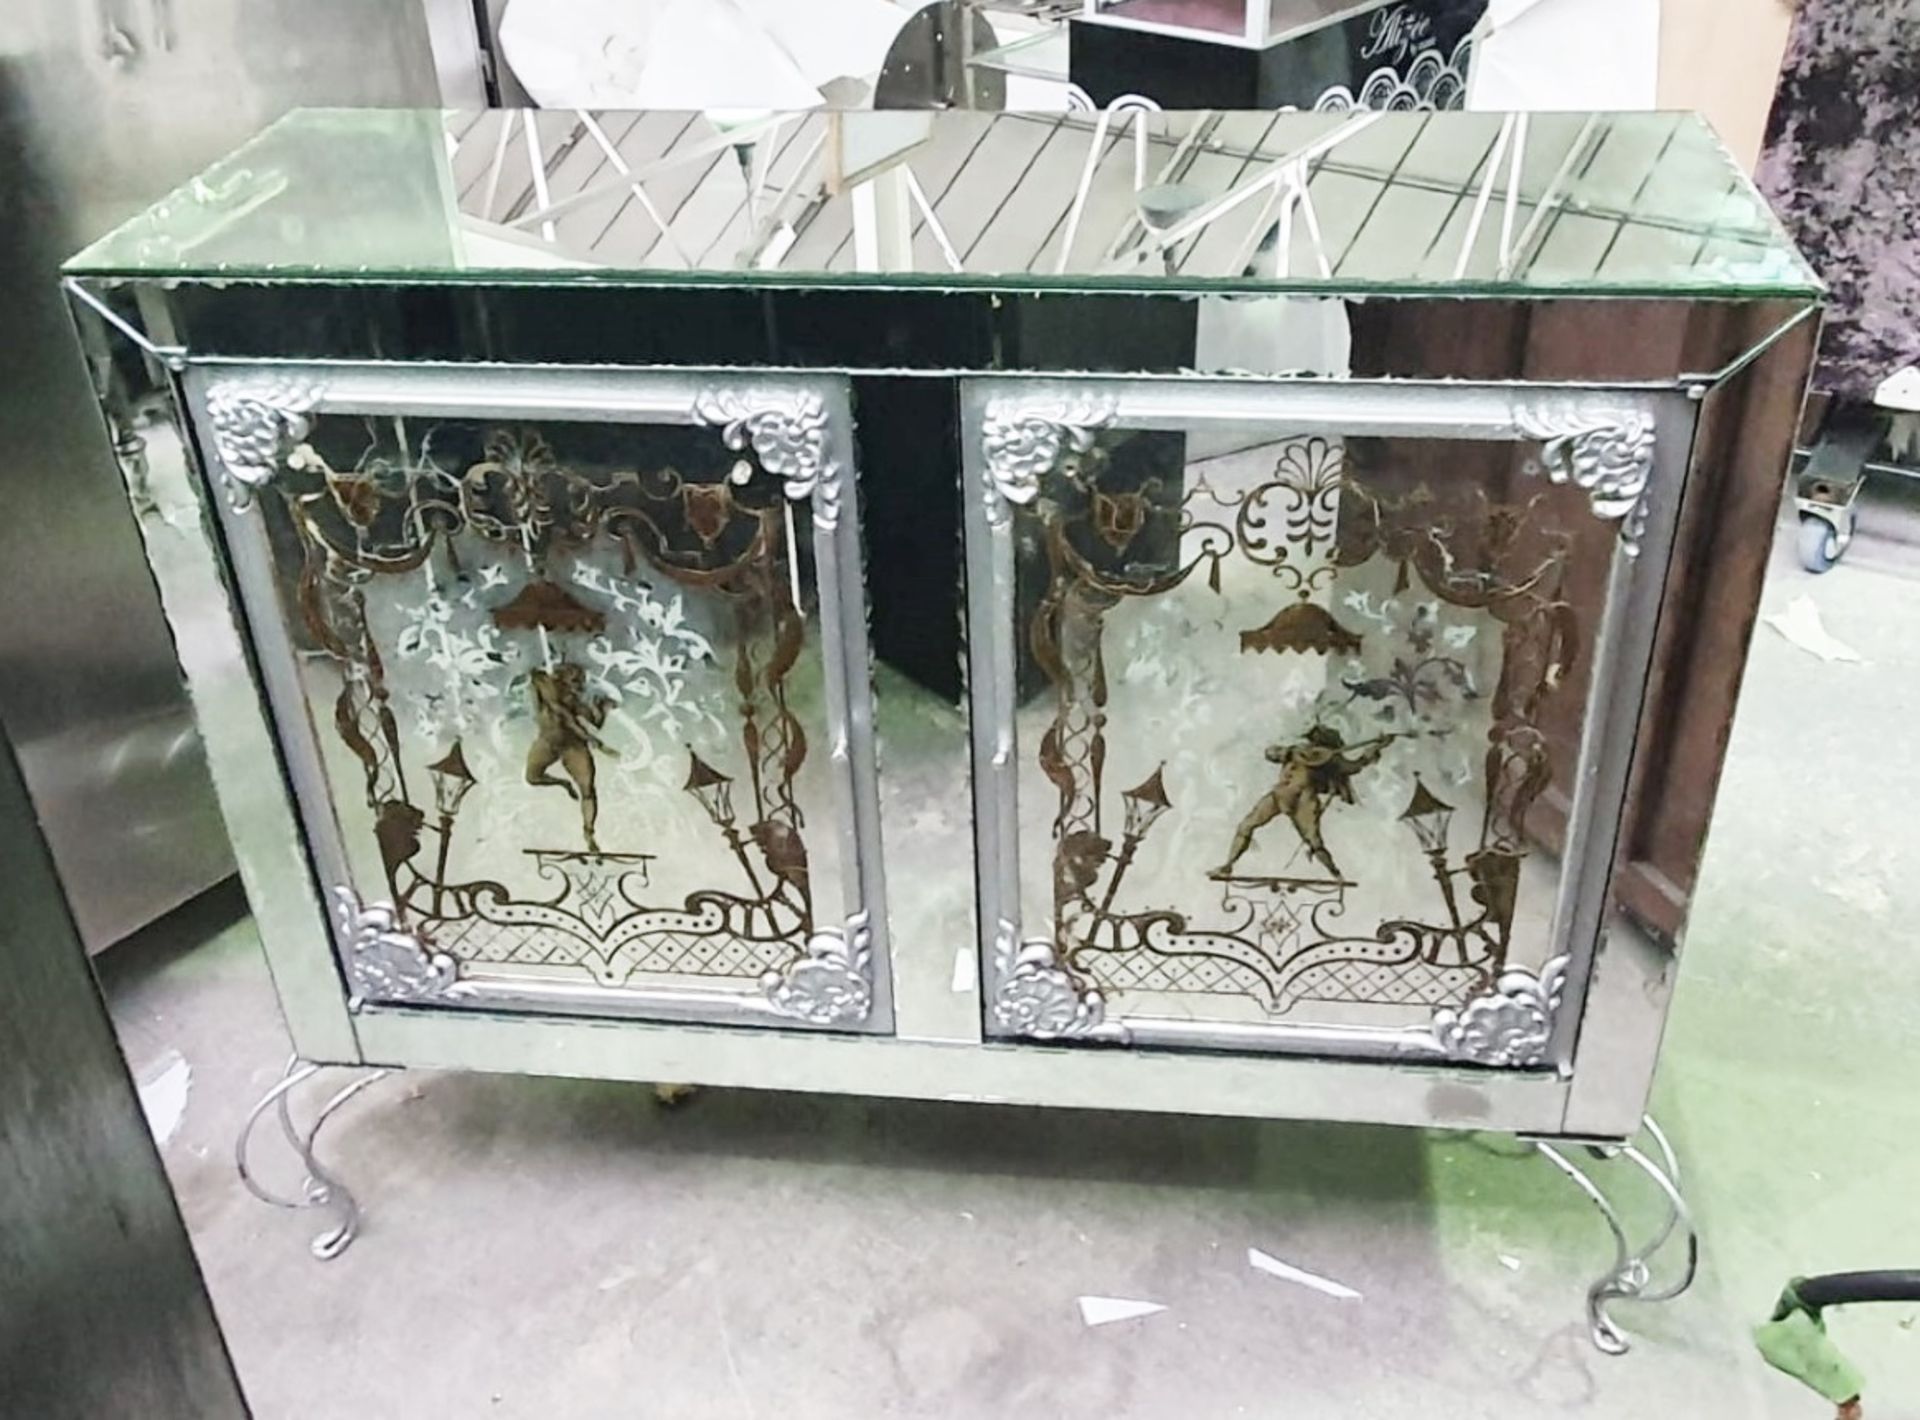 1 x Boutique Large Mirrored Sideboard With Steel Legs And Embellishments - Image 2 of 18